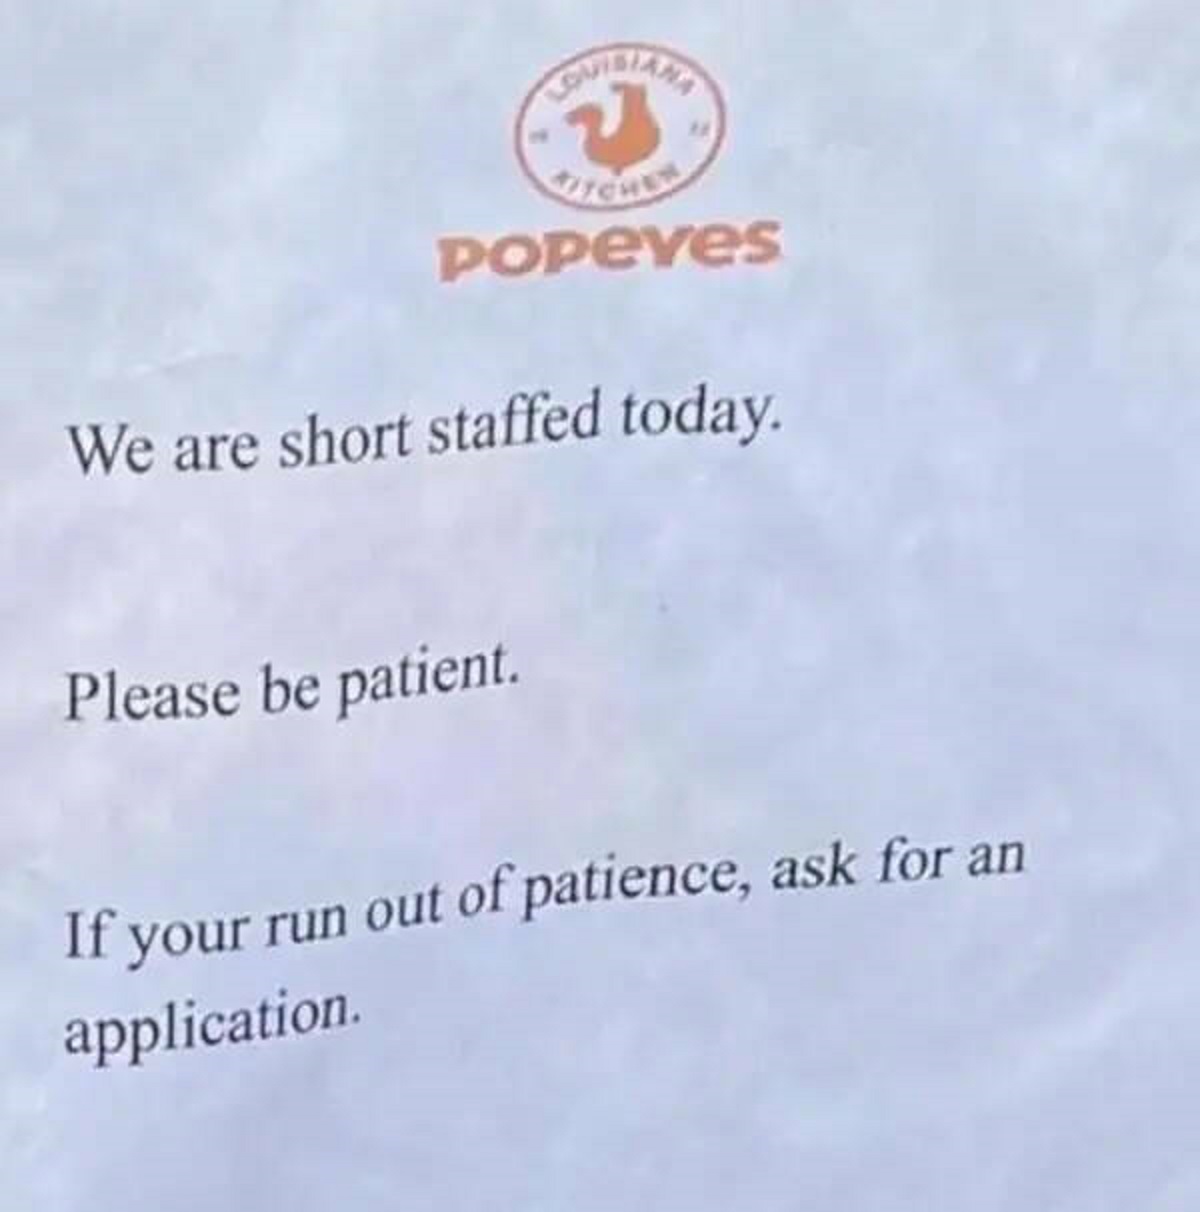 sky - POPeves We are short staffed today. Please be patient. If your run out of patience, ask for an application.